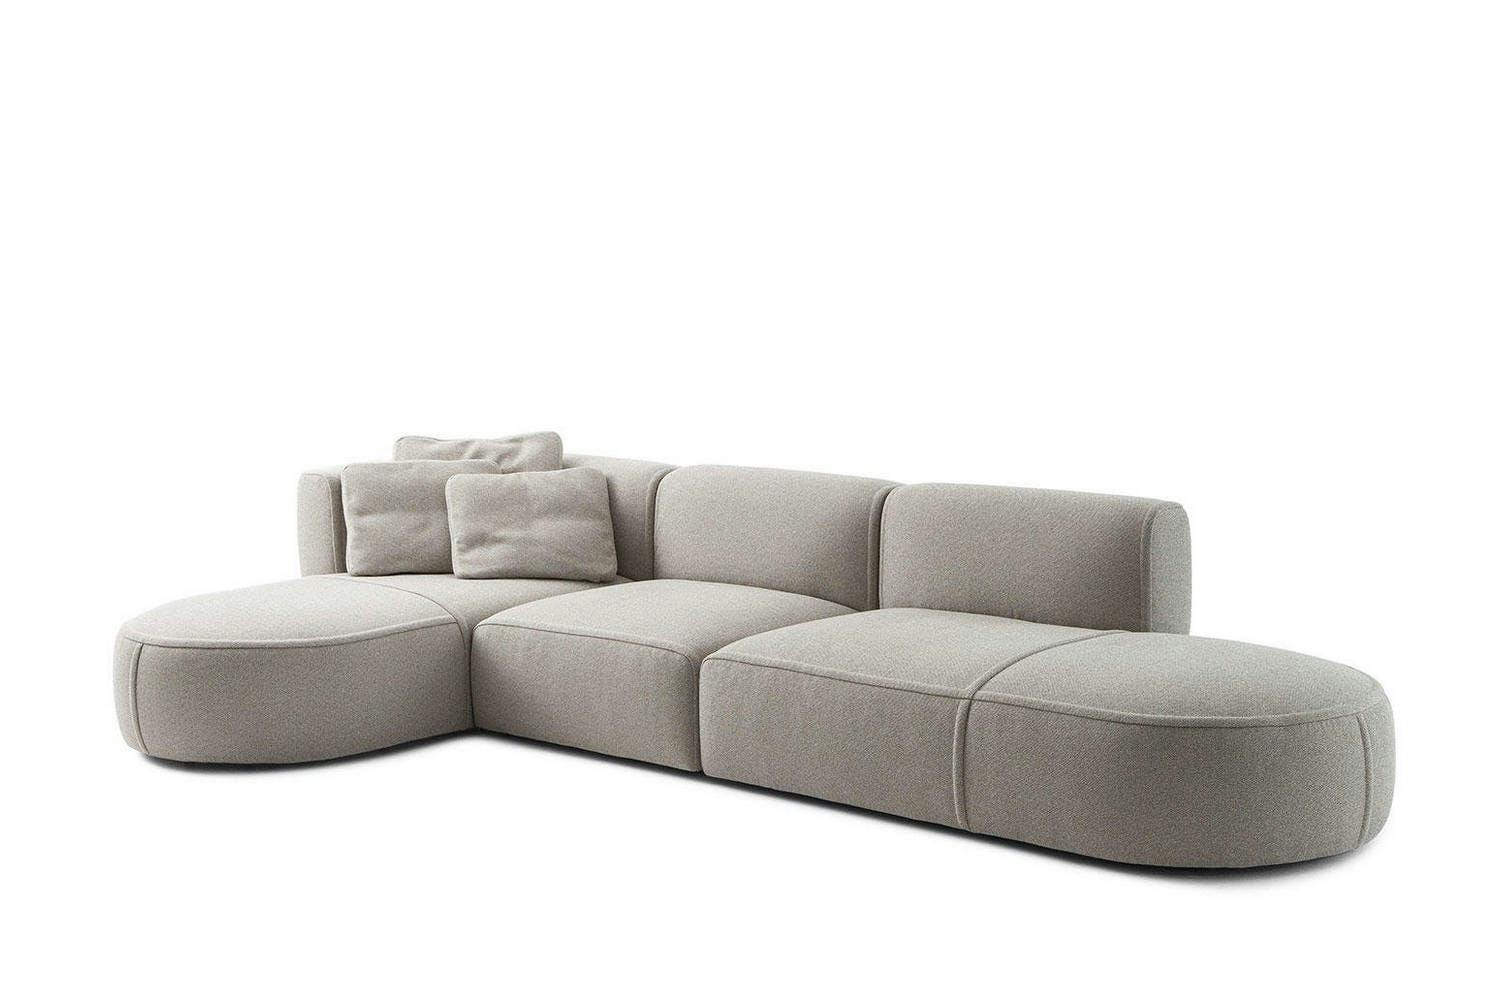 553 Bowy Sofa by Patricia Urquiola for Cassina Space